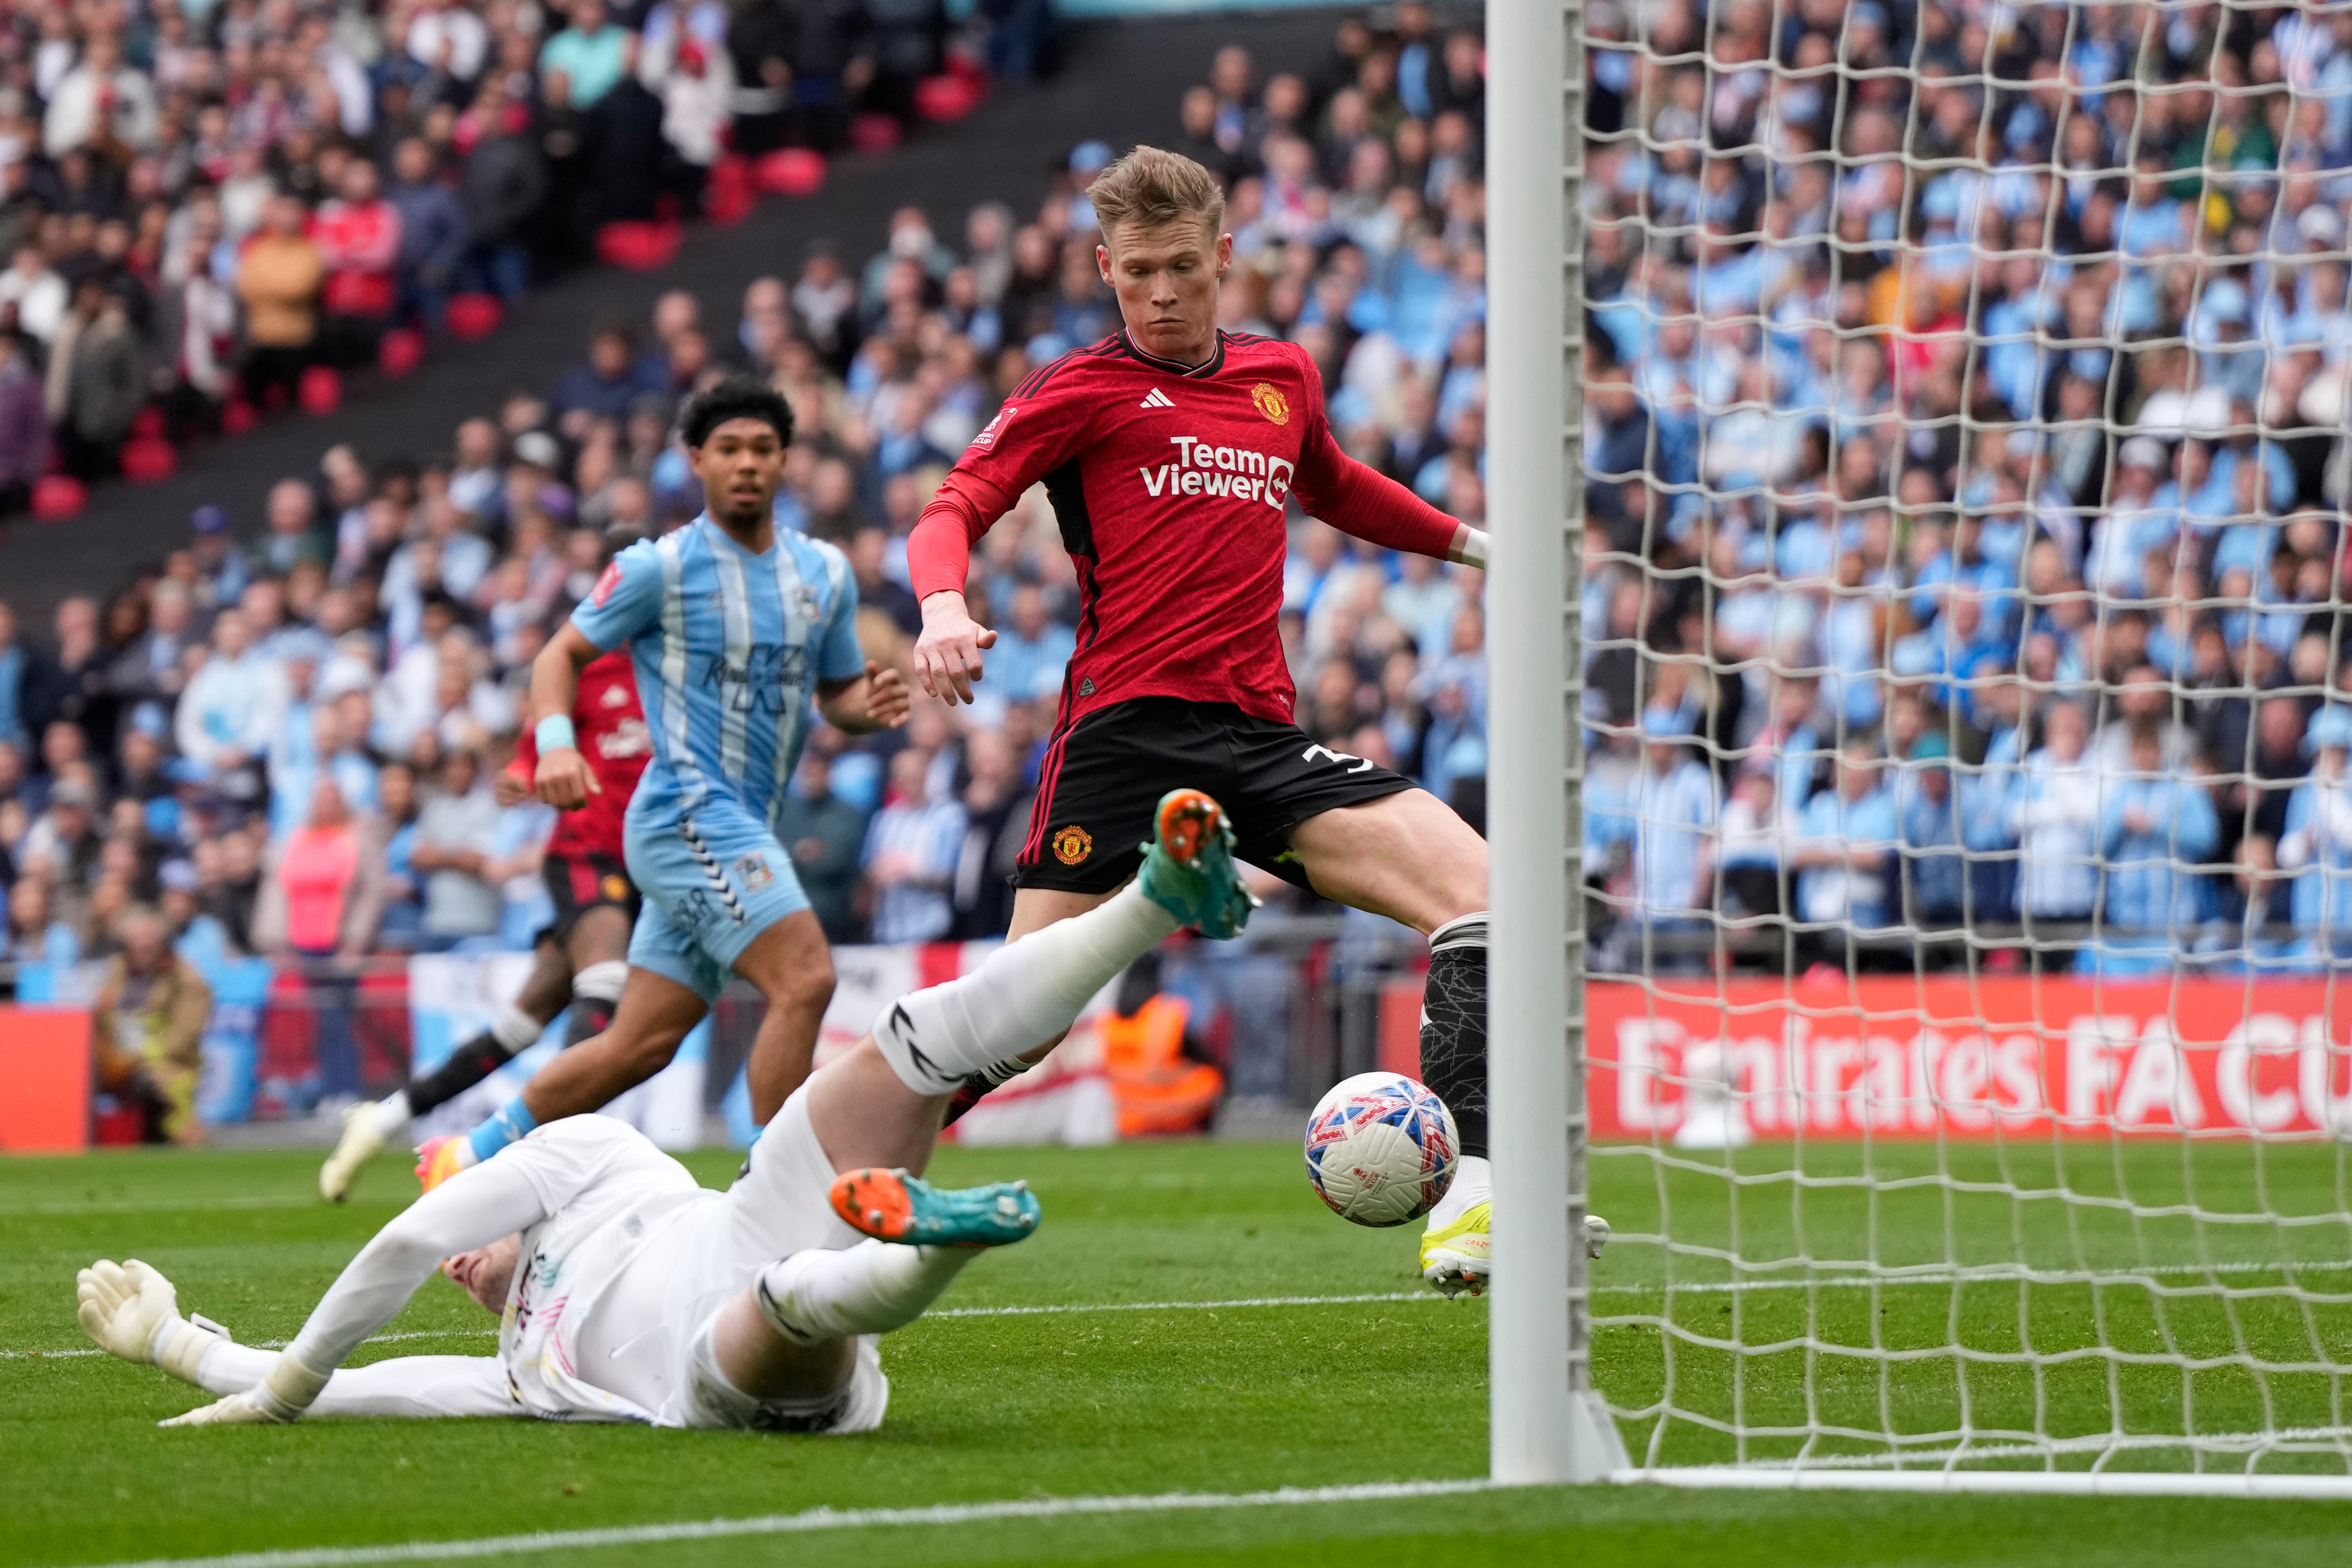 Scott McTominay returned to the team and opened the scoring for Manchester United